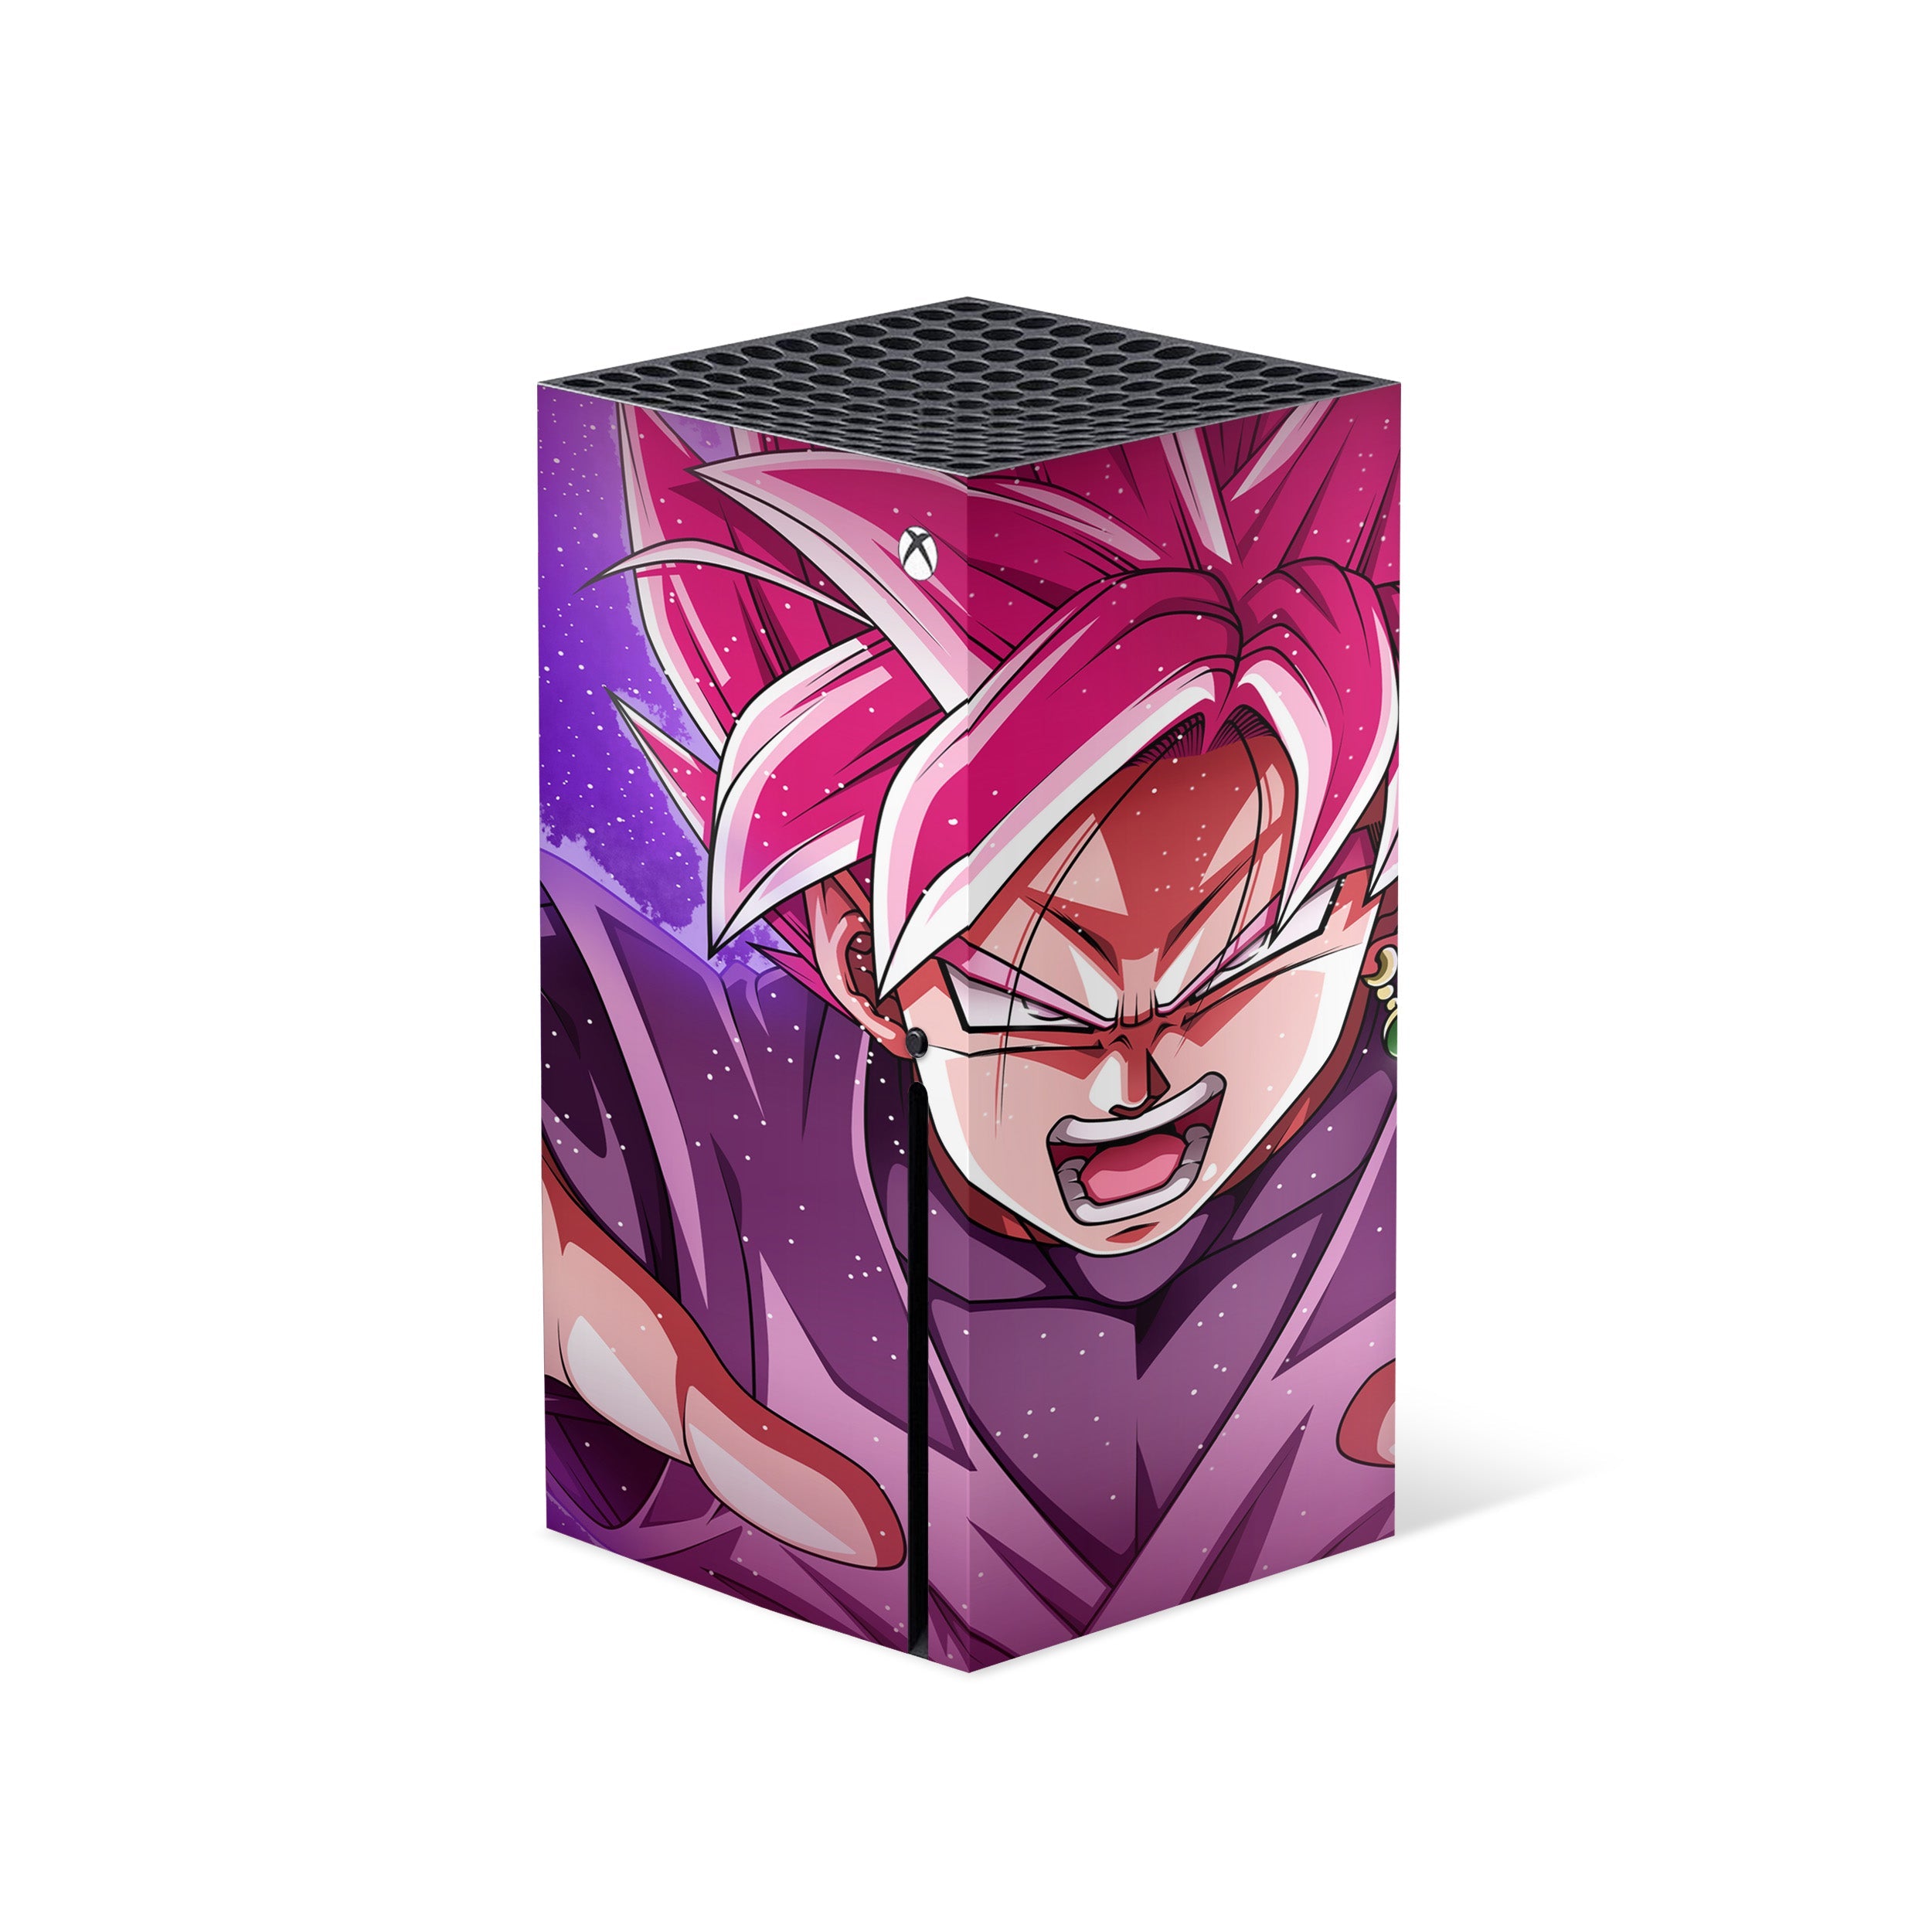 A video game skin featuring a Dragon Ball Super Goku design for the Xbox Series X.